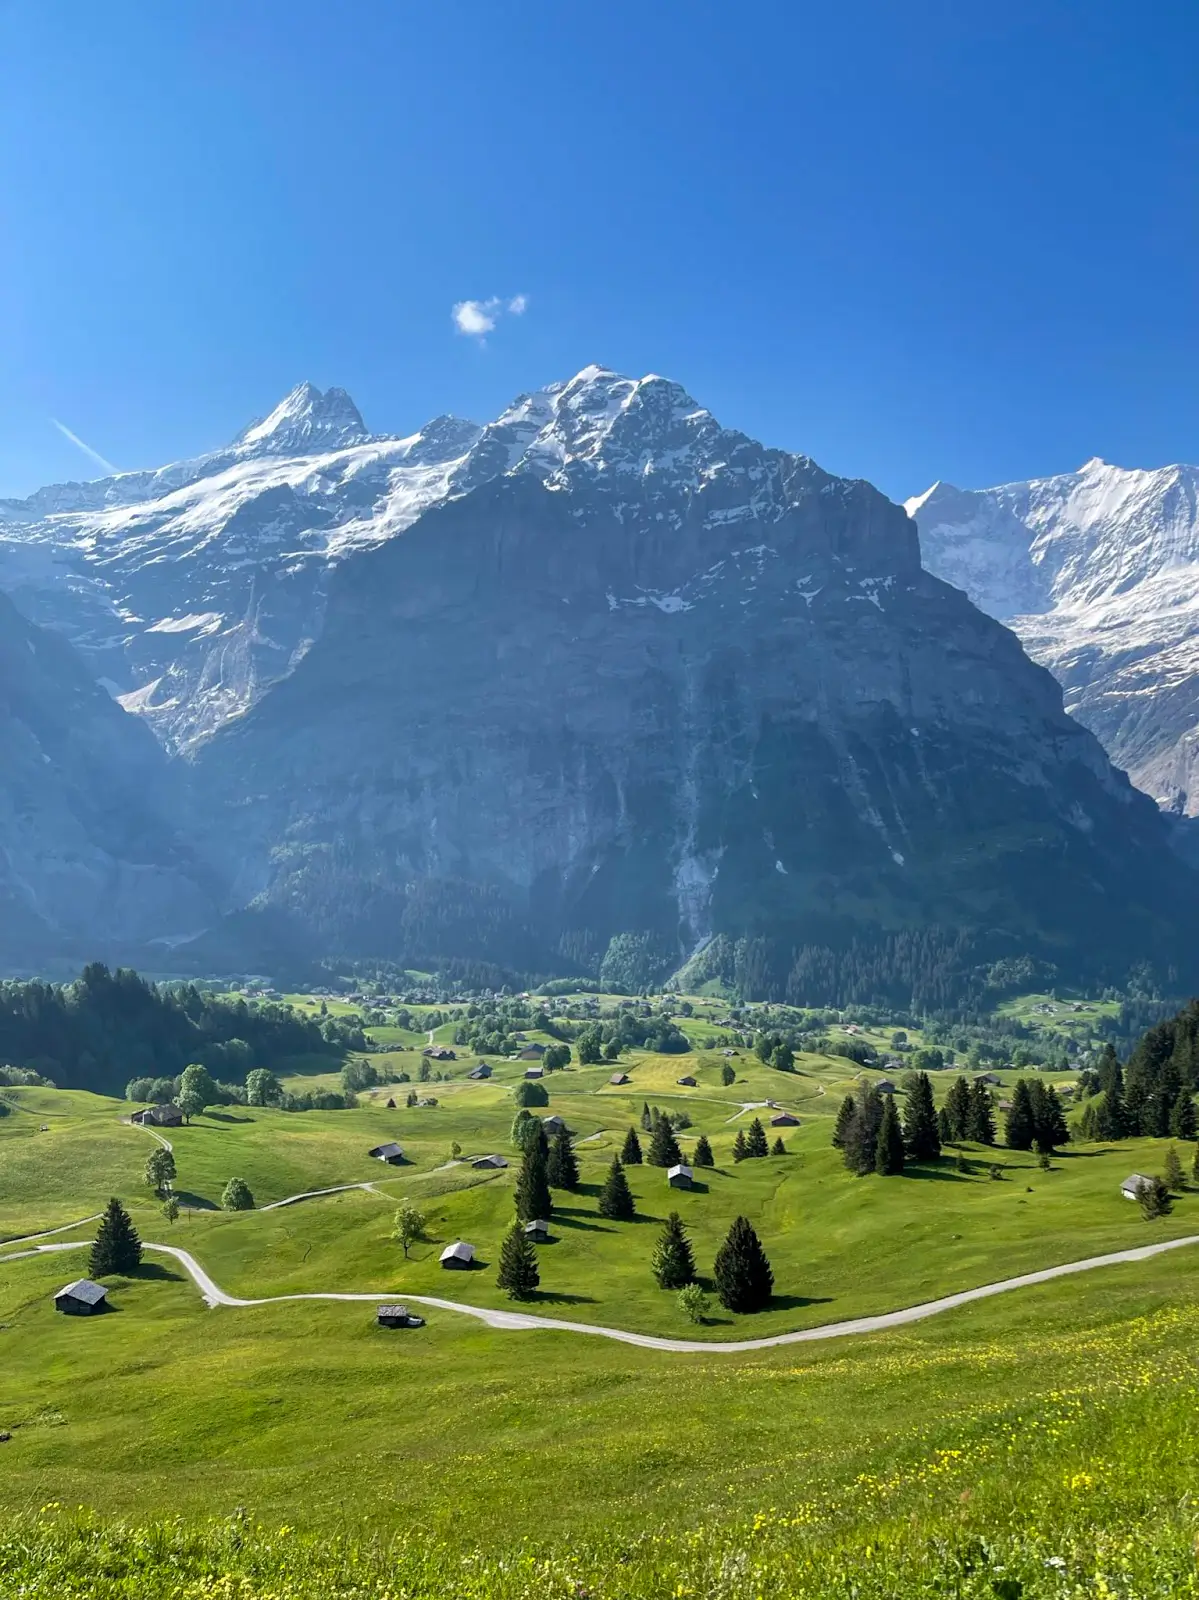 Stunning view of Grindelwald village with the majestic Swiss Alps in the background under a clear blue sky. An answer to "Is Grindelwald Worth Visiting?"